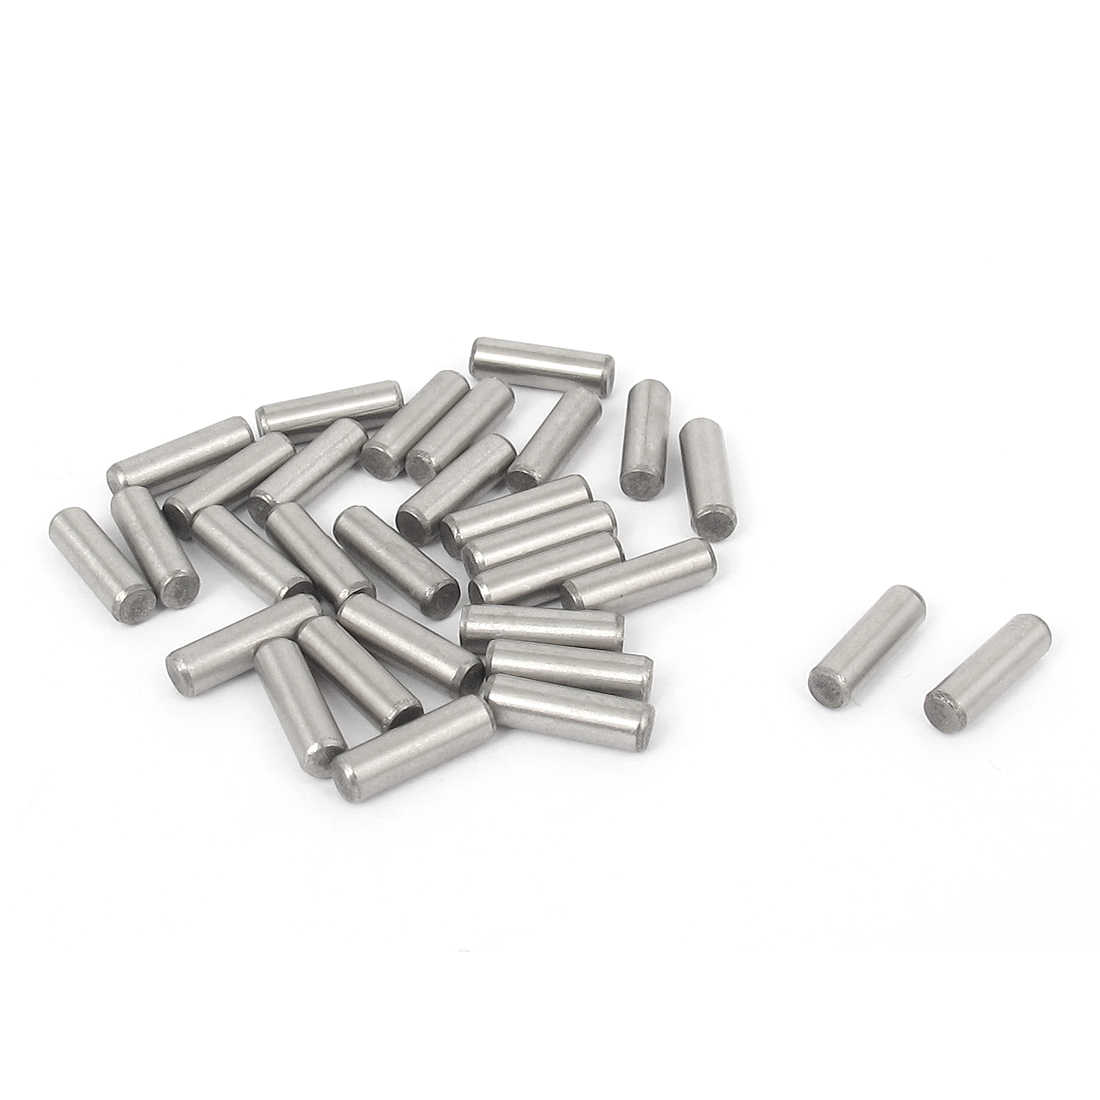 3mmx10mm 304 Stainless Steel Parallel Dowel Pins Fastener Elements 30pcs